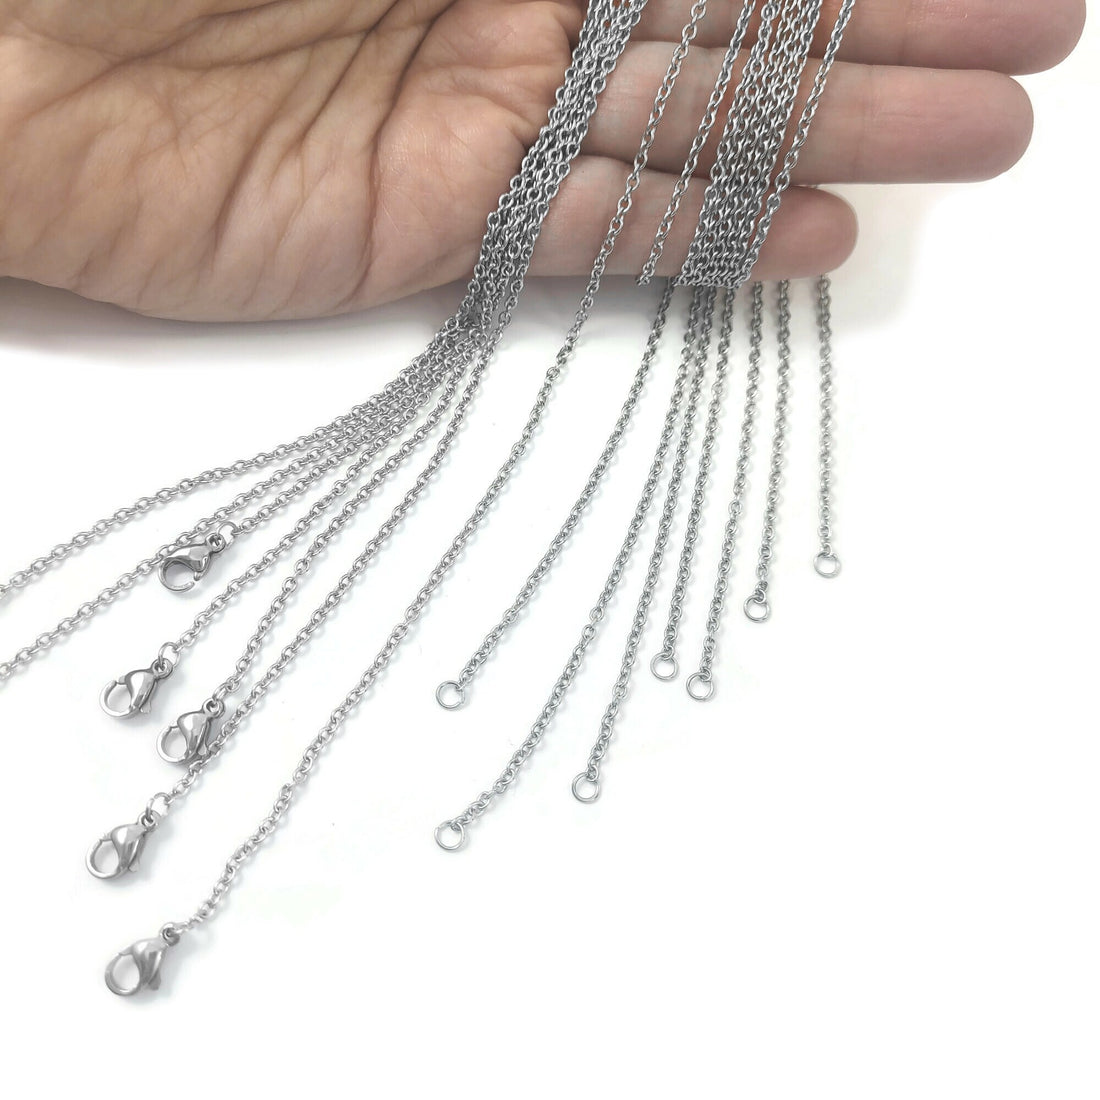 Cable chain necklace, Silver stainless steel, Bulk lot for jewelry making, 20 inches, 22 inches